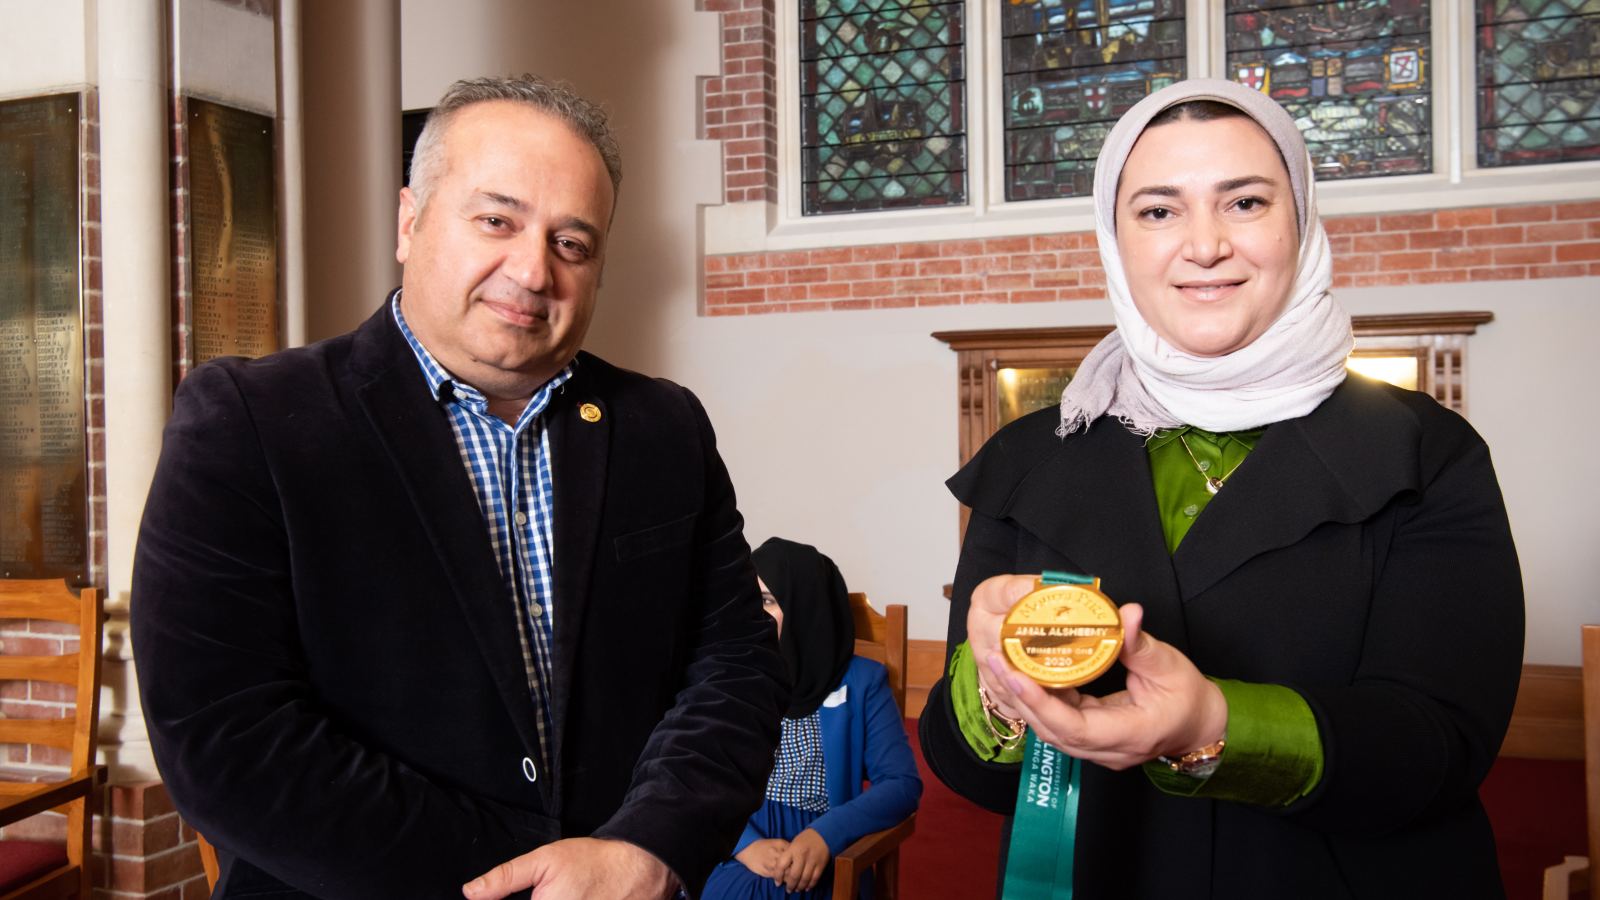 Man with suit and girl with pink headscarf showing medal in her hand, with stained glass window background